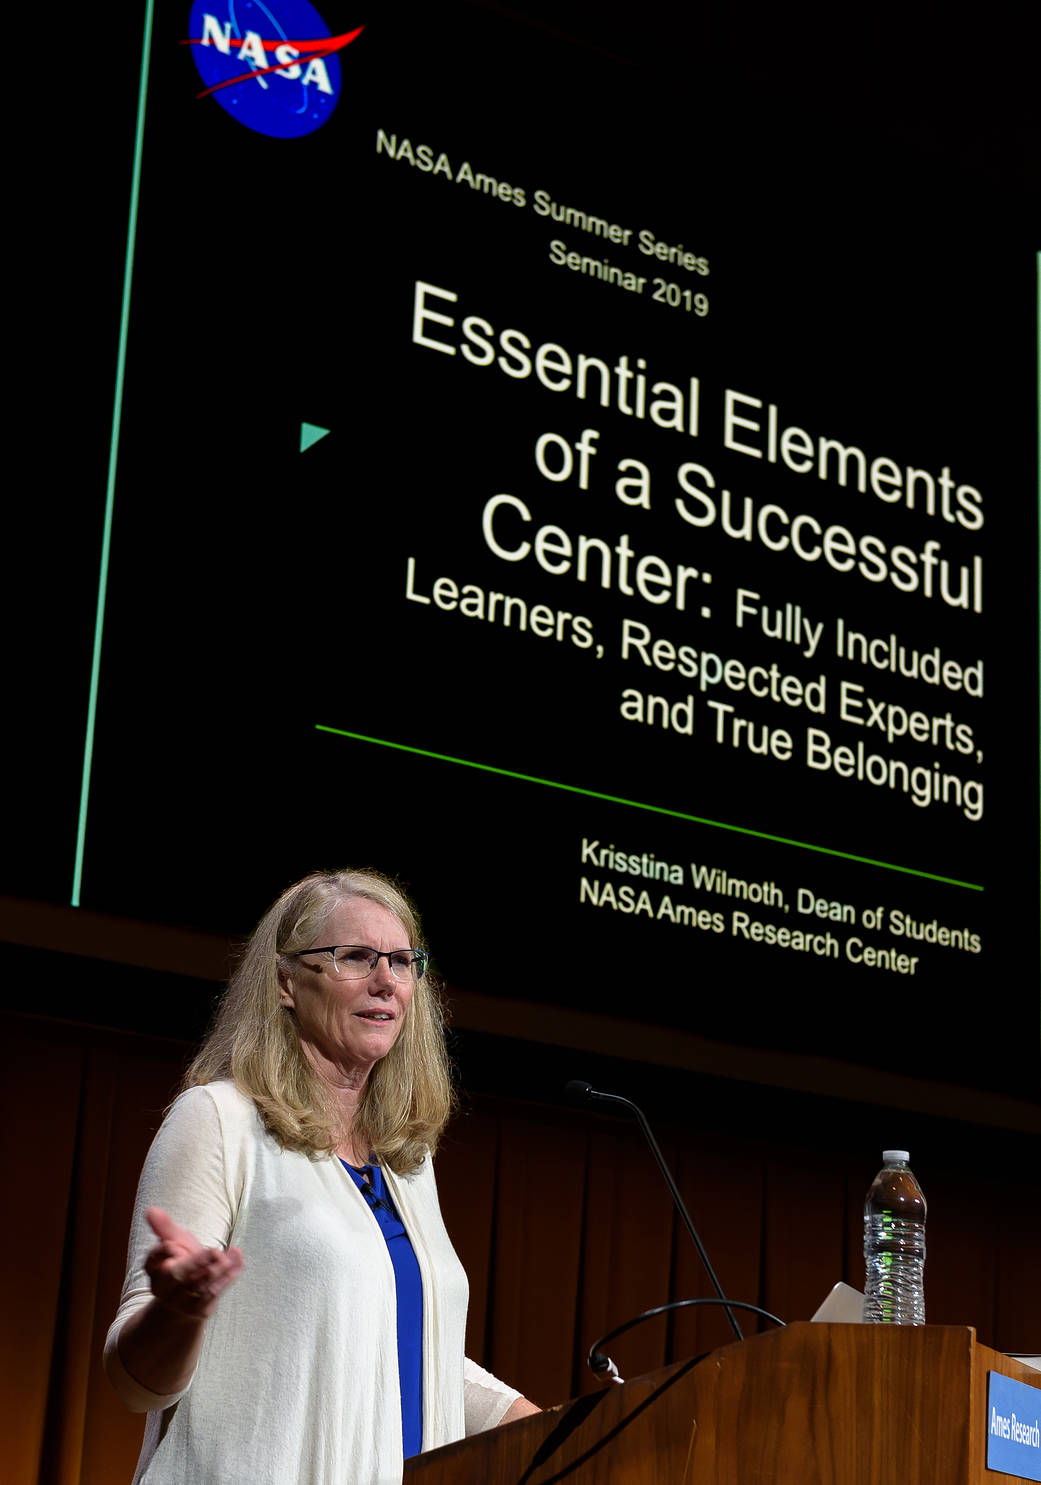 Krisstina Wilmoth - Essential Elements of a Successful Center: Fully Included Learners, Respected Experts, and True Belonging